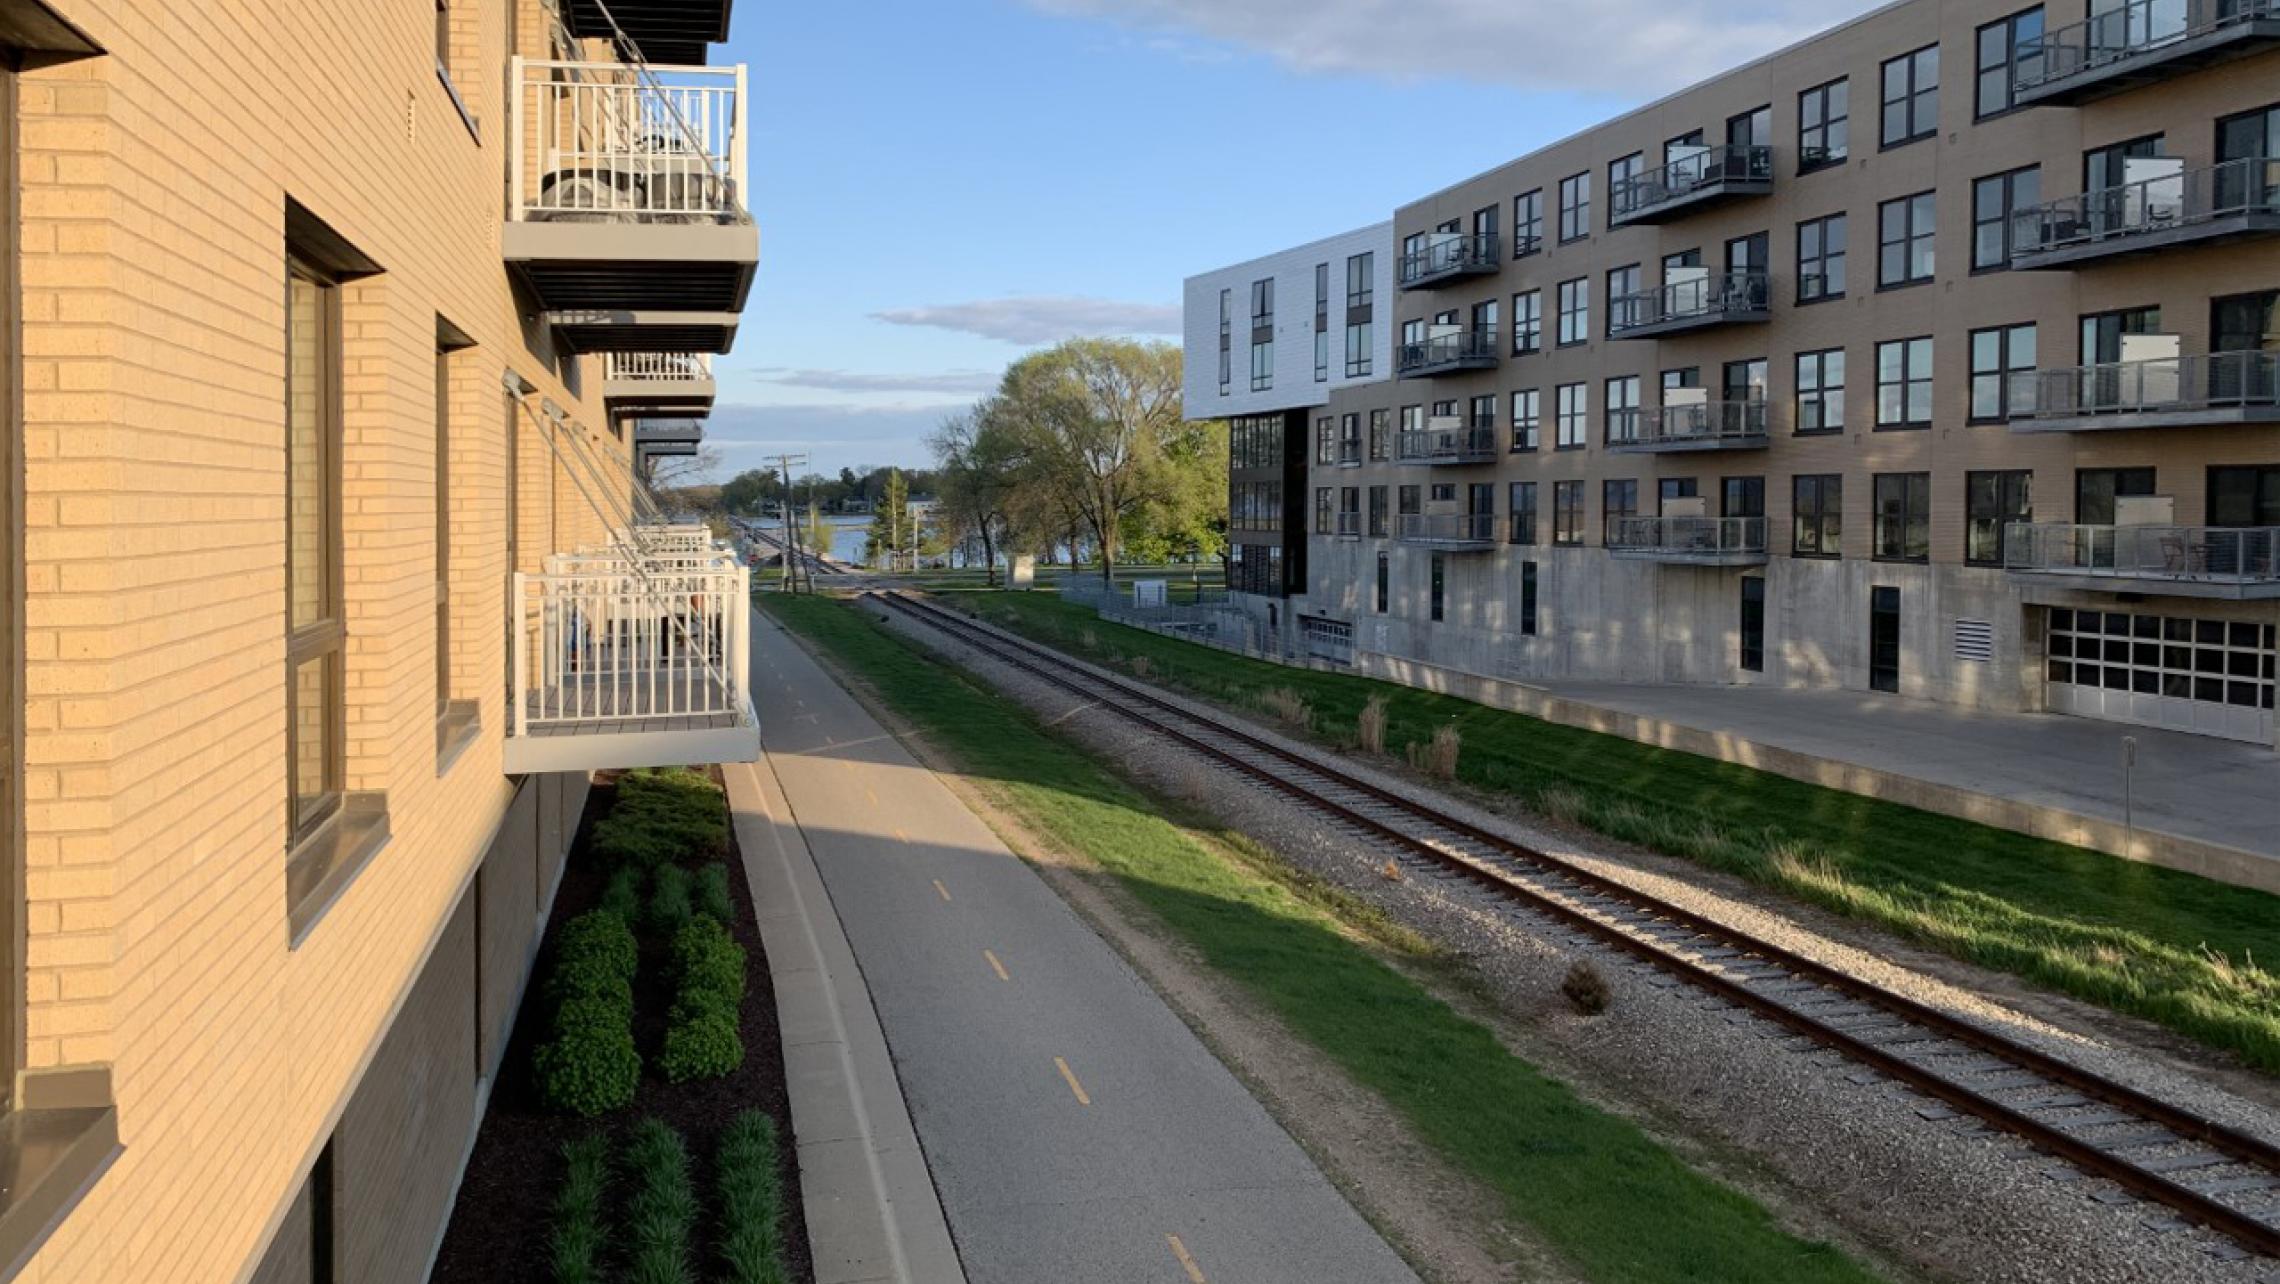 Nine-Line-at-The-Yards-Two-Bedroom-Apartment-214-Corner-Windows-Views-Stunning-Downtown-Madison-Bike-Path-Capitol-Lake-Modern-Upscale-Fitness-Gym-Dogs-Cats-Balcony-Patio